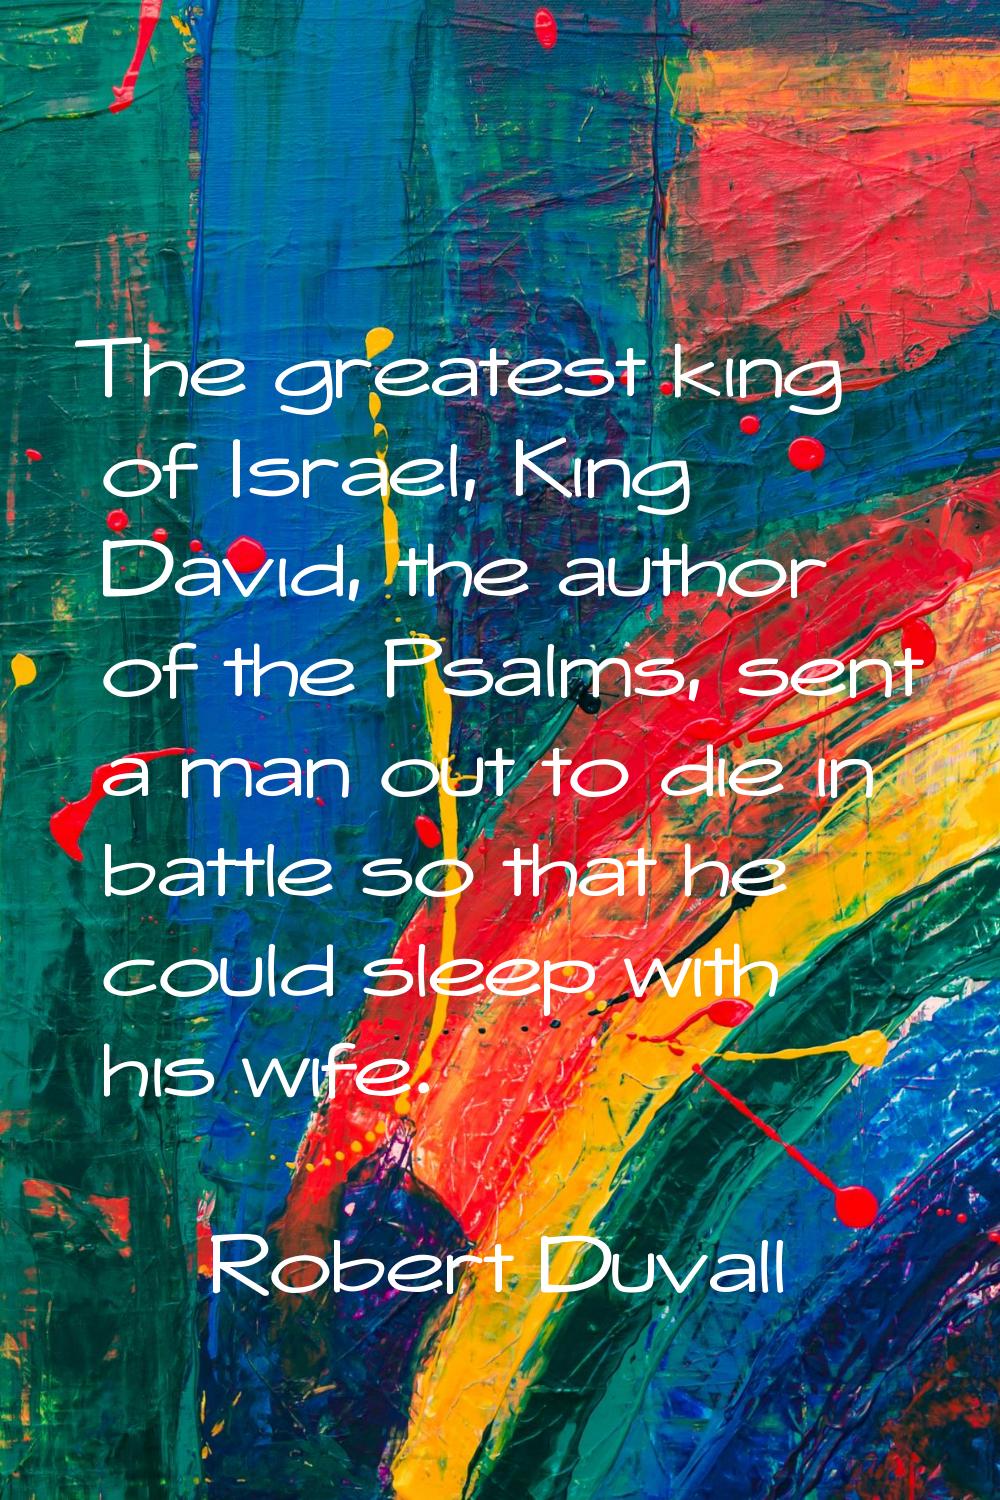 The greatest king of Israel, King David, the author of the Psalms, sent a man out to die in battle 